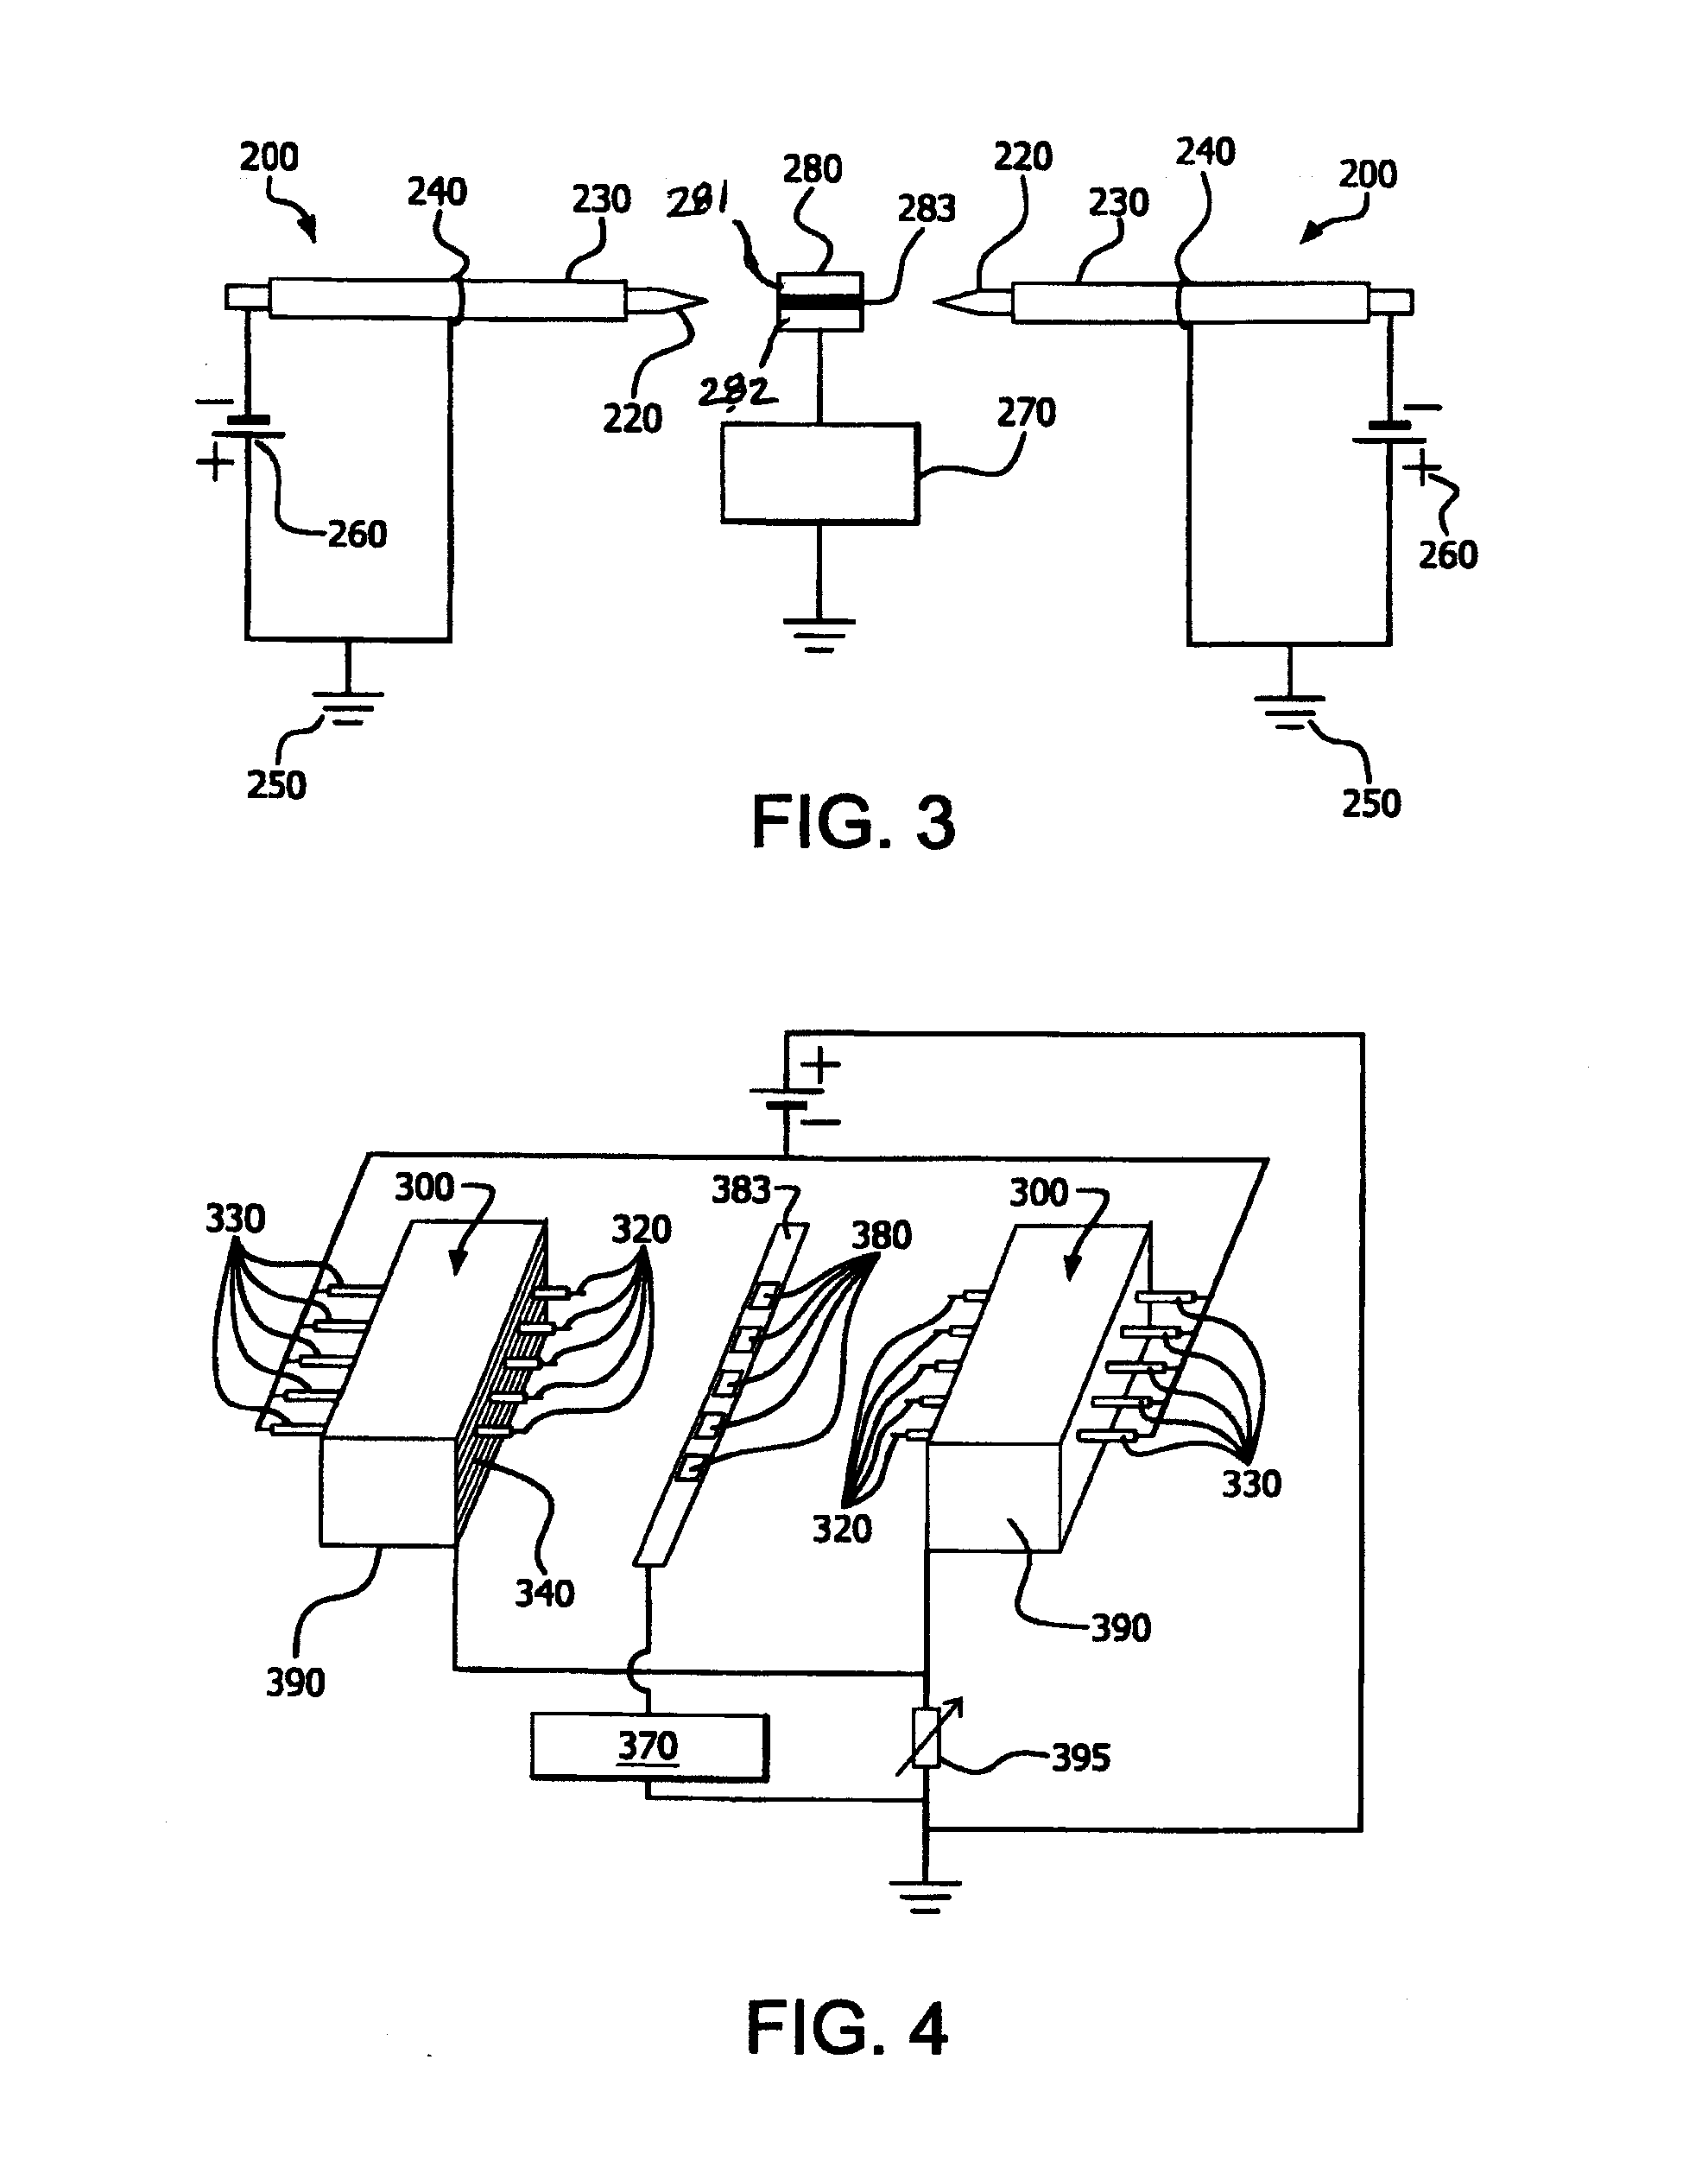 Apparatus and Method for Removal of Surface Oxides Via Fluxless Technique Involving Electron Attachment